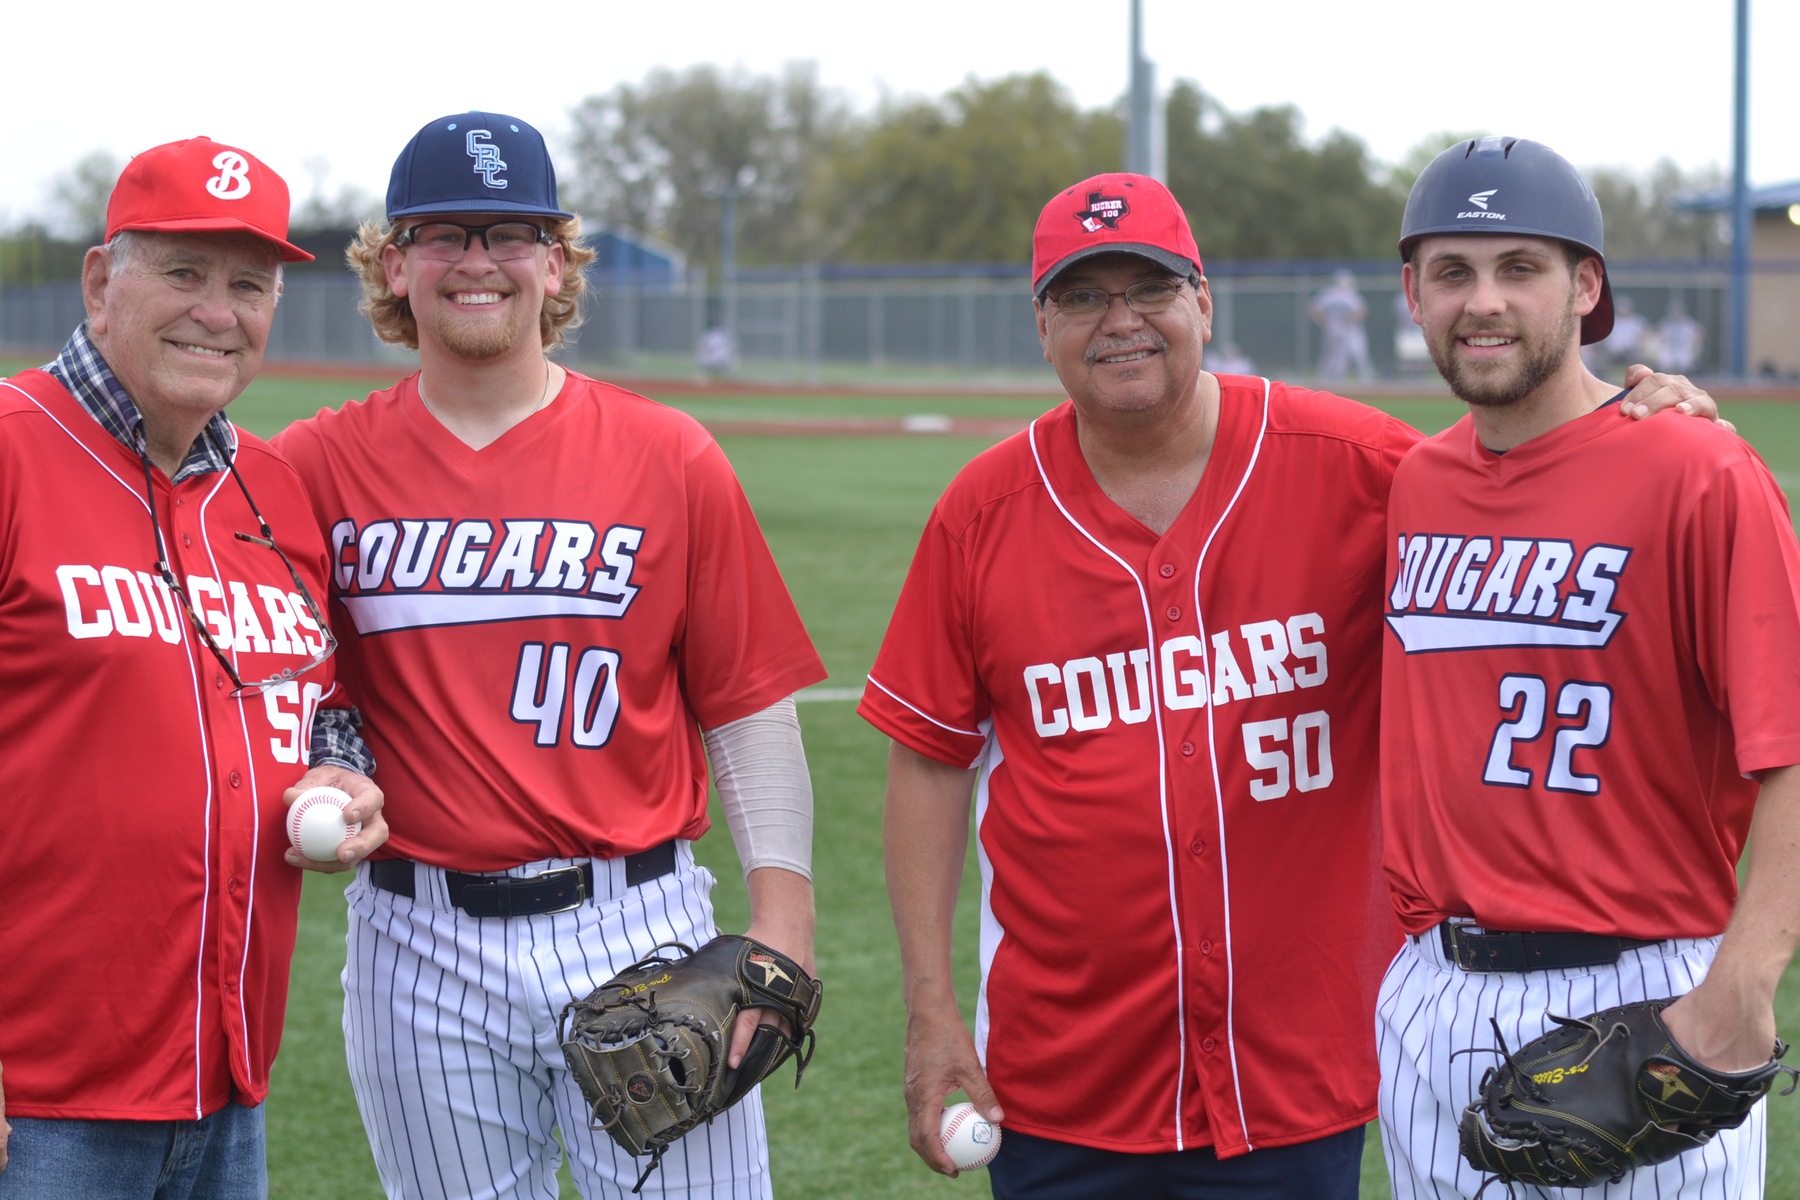 Cougars Make South Suburban College See Red